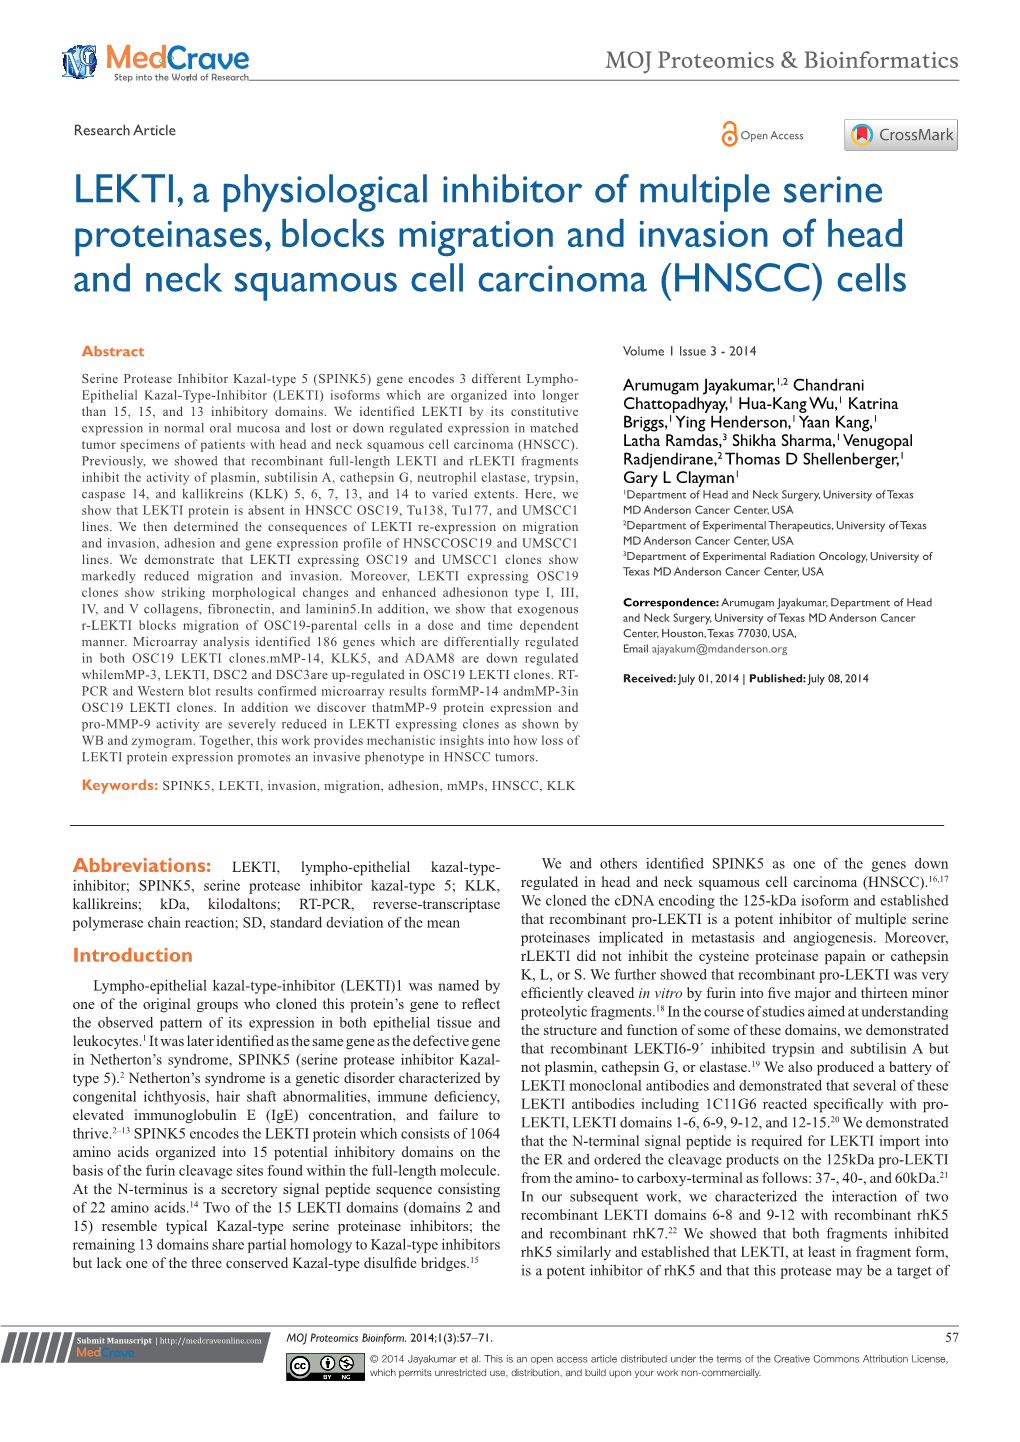 LEKTI, a Physiological Inhibitor of Multiple Serine Proteinases, Blocks Migration and Invasion of Head and Neck Squamous Cell Carcinoma (HNSCC) Cells